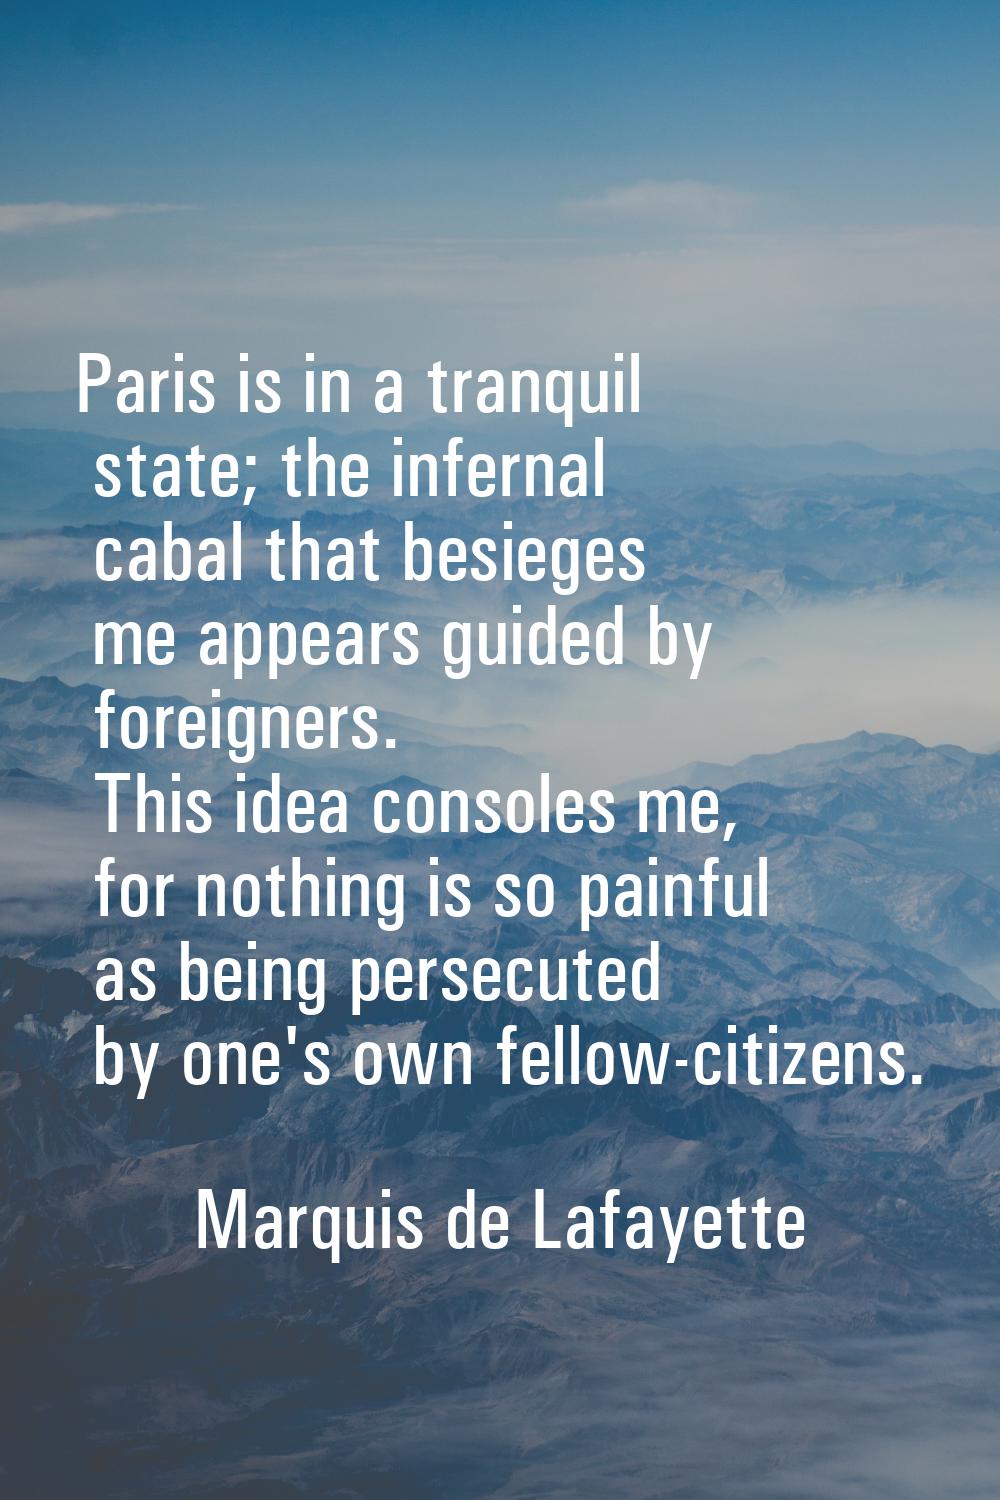 Paris is in a tranquil state; the infernal cabal that besieges me appears guided by foreigners. Thi